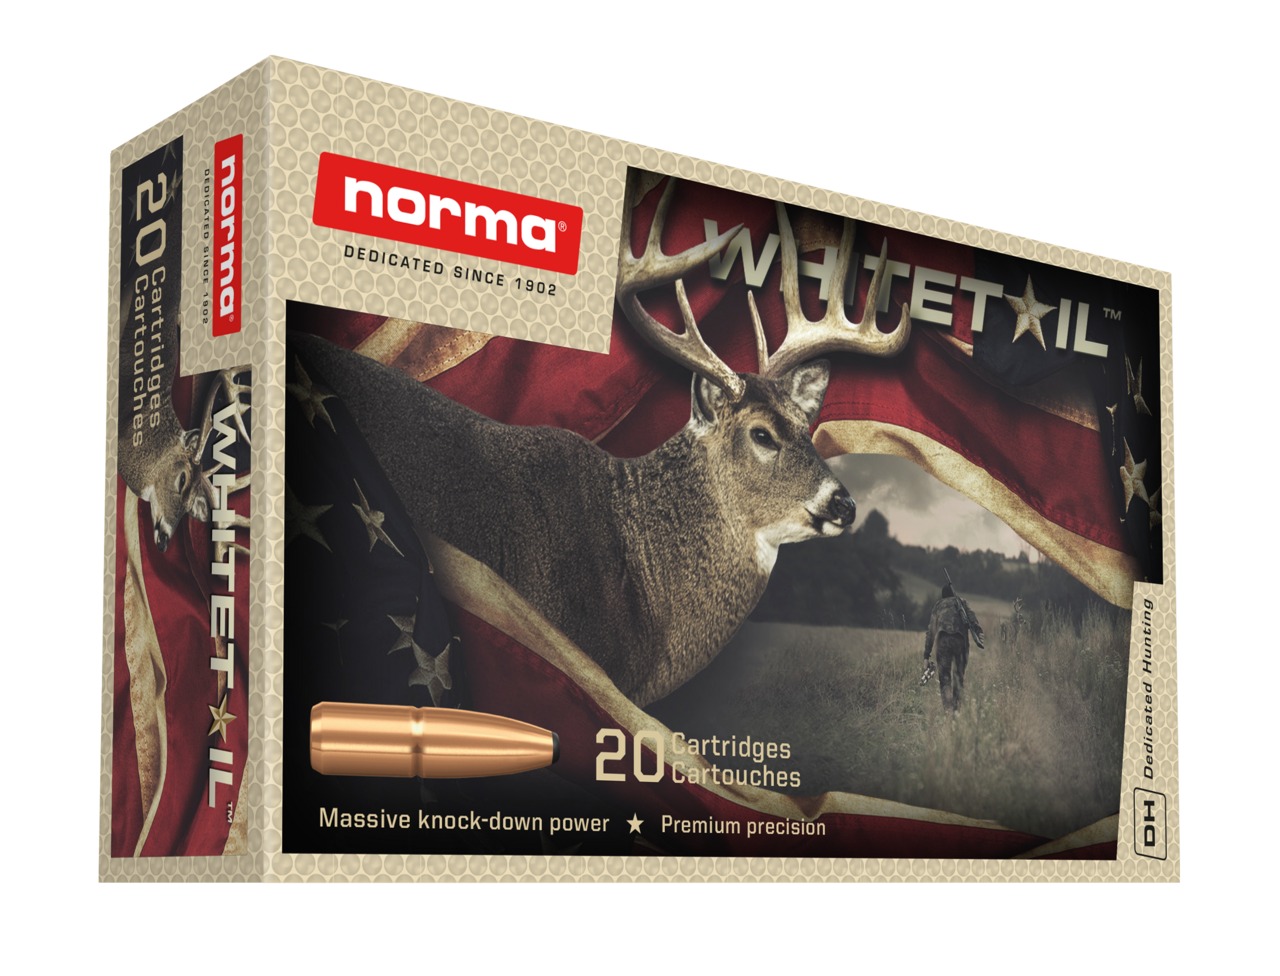 CART NORMA 8X57JRS 12.7G/196GR WHITETAIL BTE 20 ref 20180462 NORMA